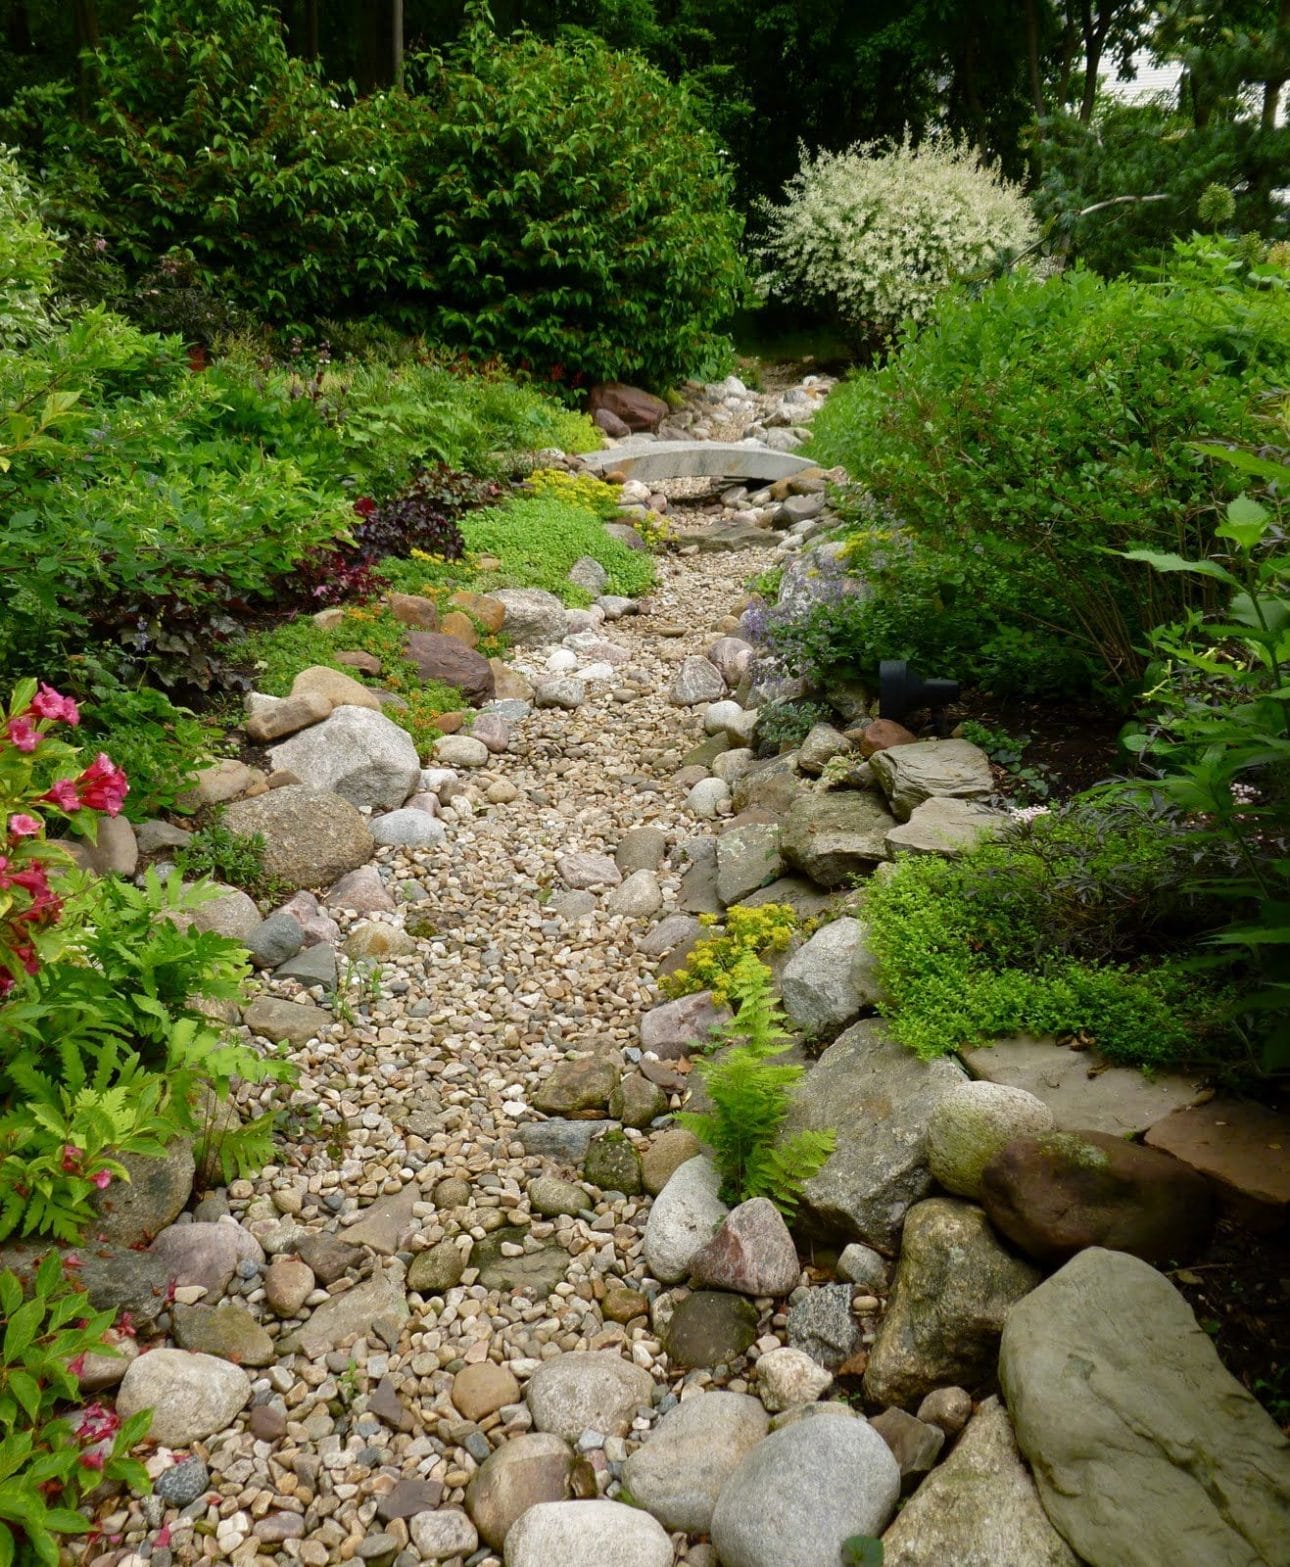 Different Types of Stones for Dry Creek Bed Landscaping